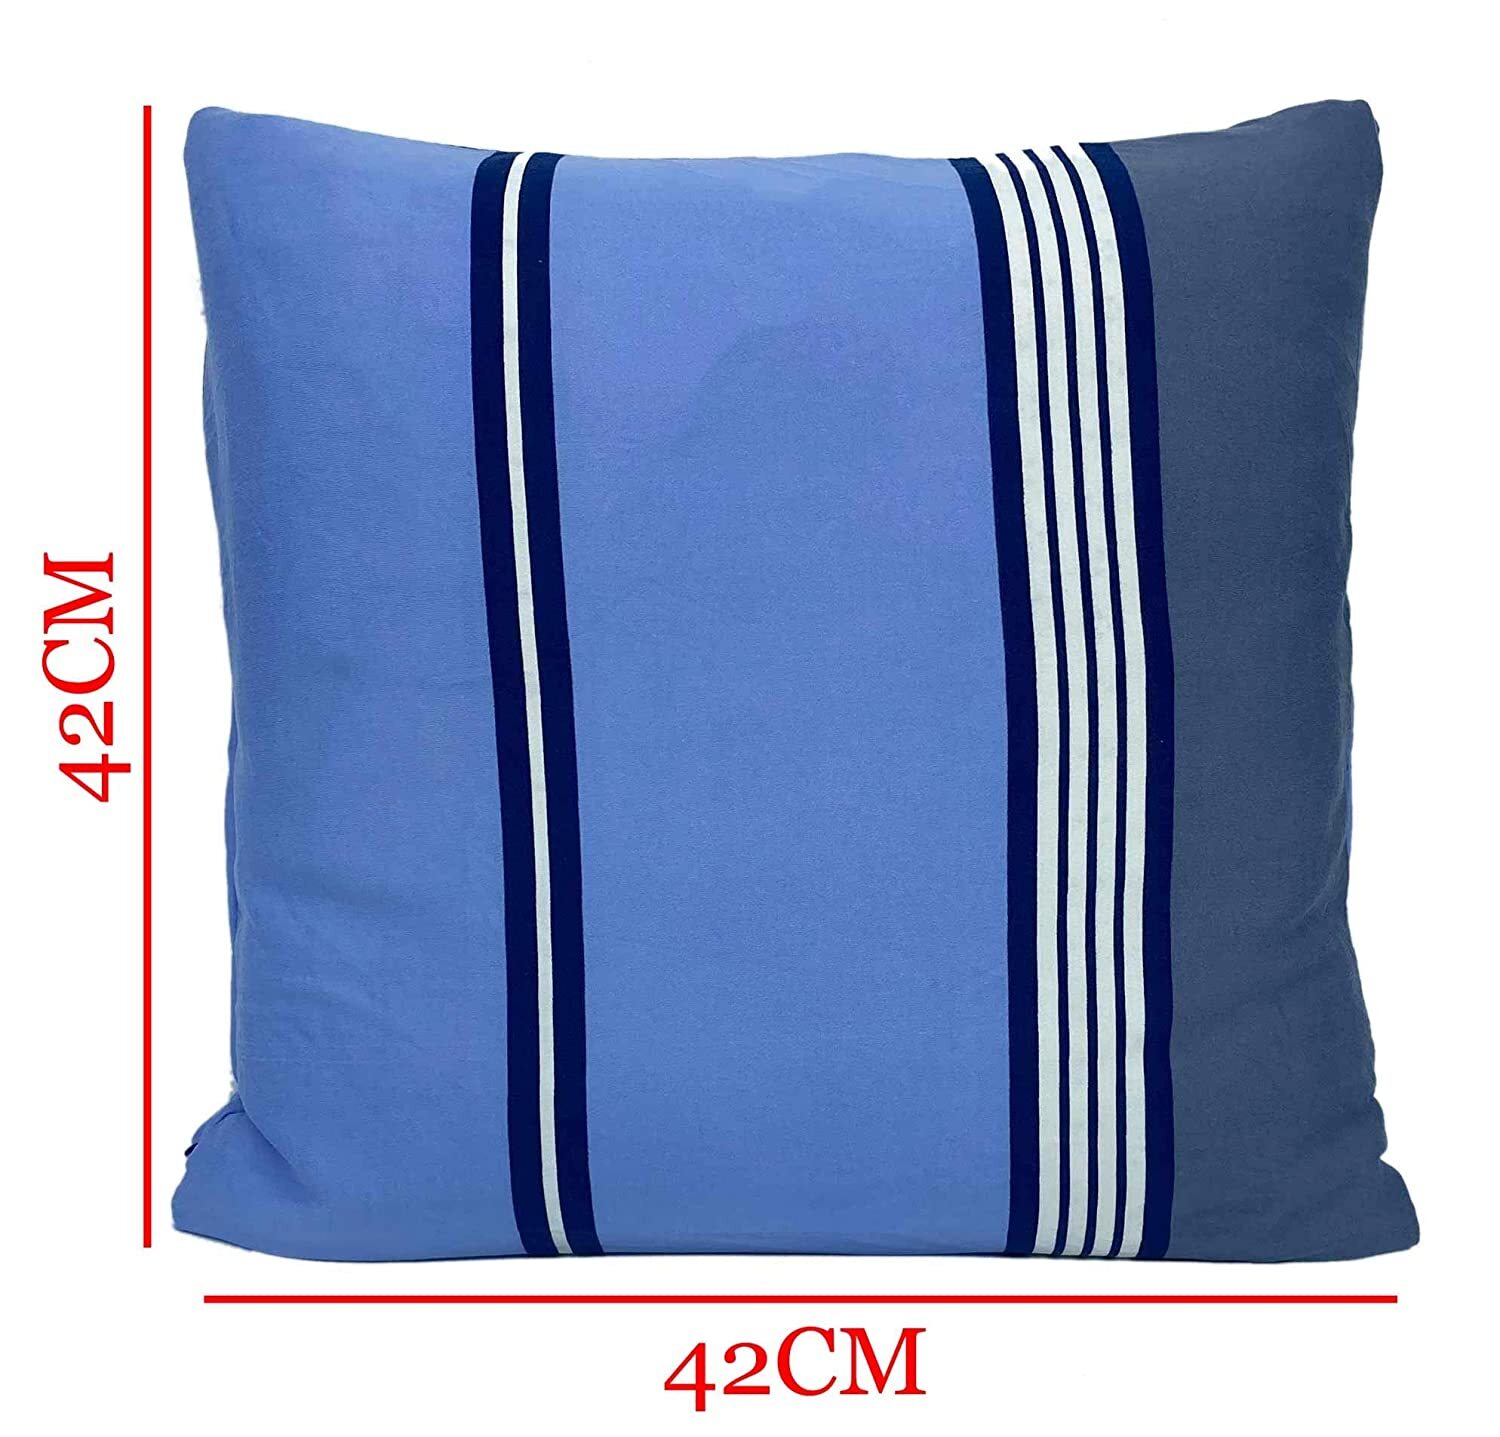 Polyester Throw Pillow Case Cushion Cover Home Sofa Decorative Cover Only No Insert 16.5x16.5 inch/ 42x42cm Check